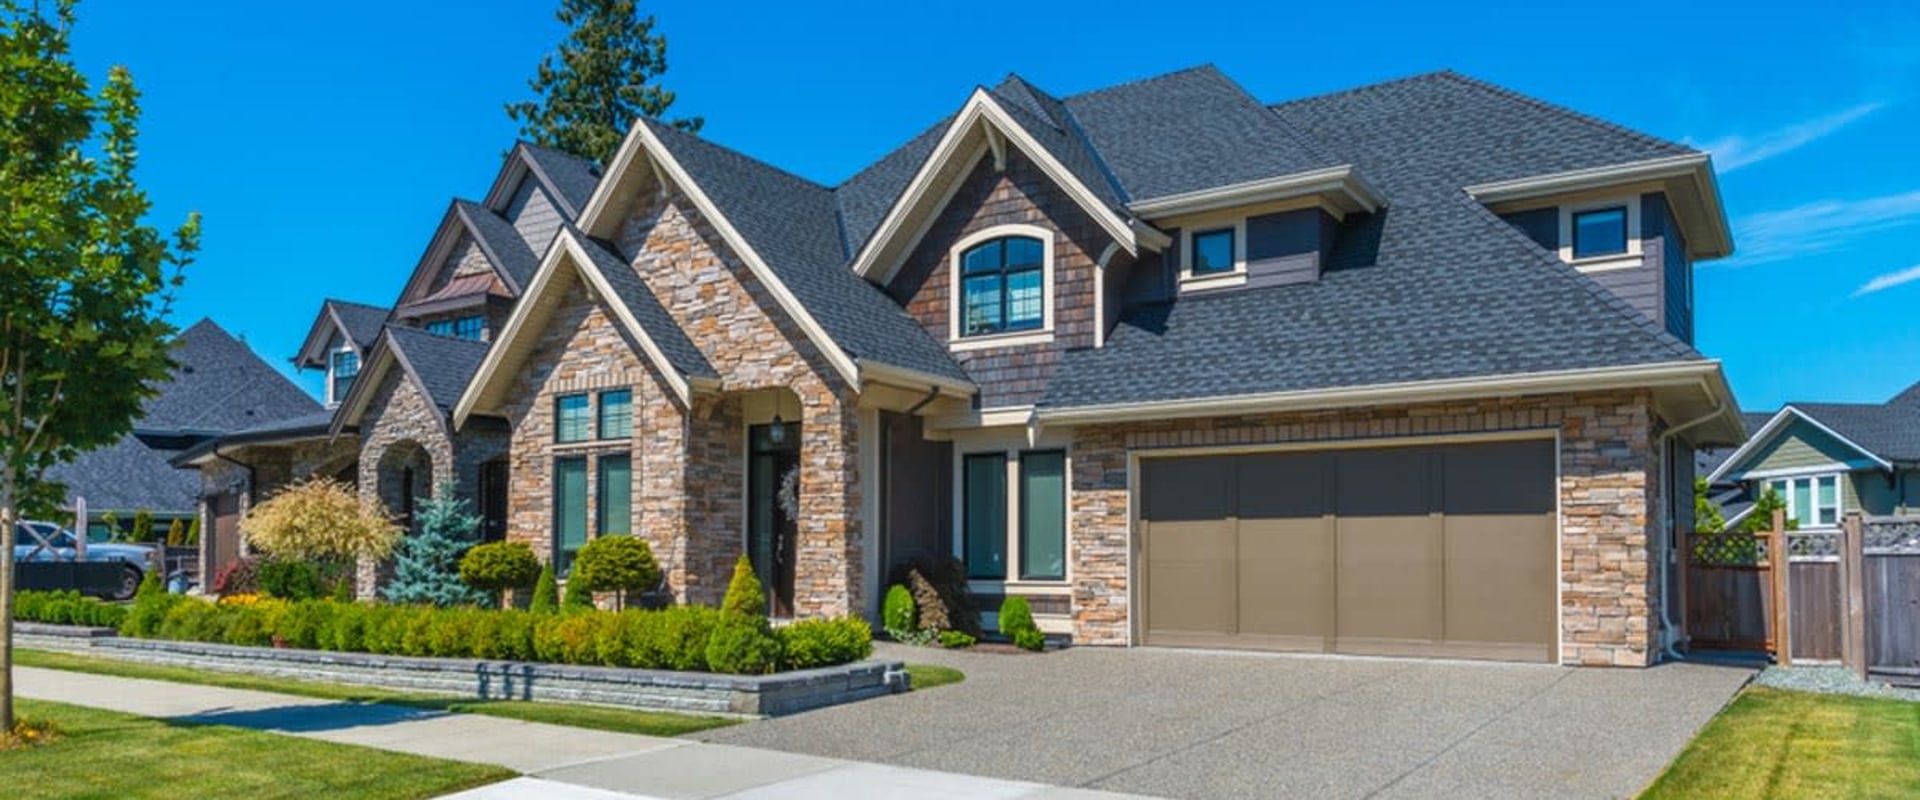 Understanding Payment Schedules and Additional Costs for Your Custom Home Build